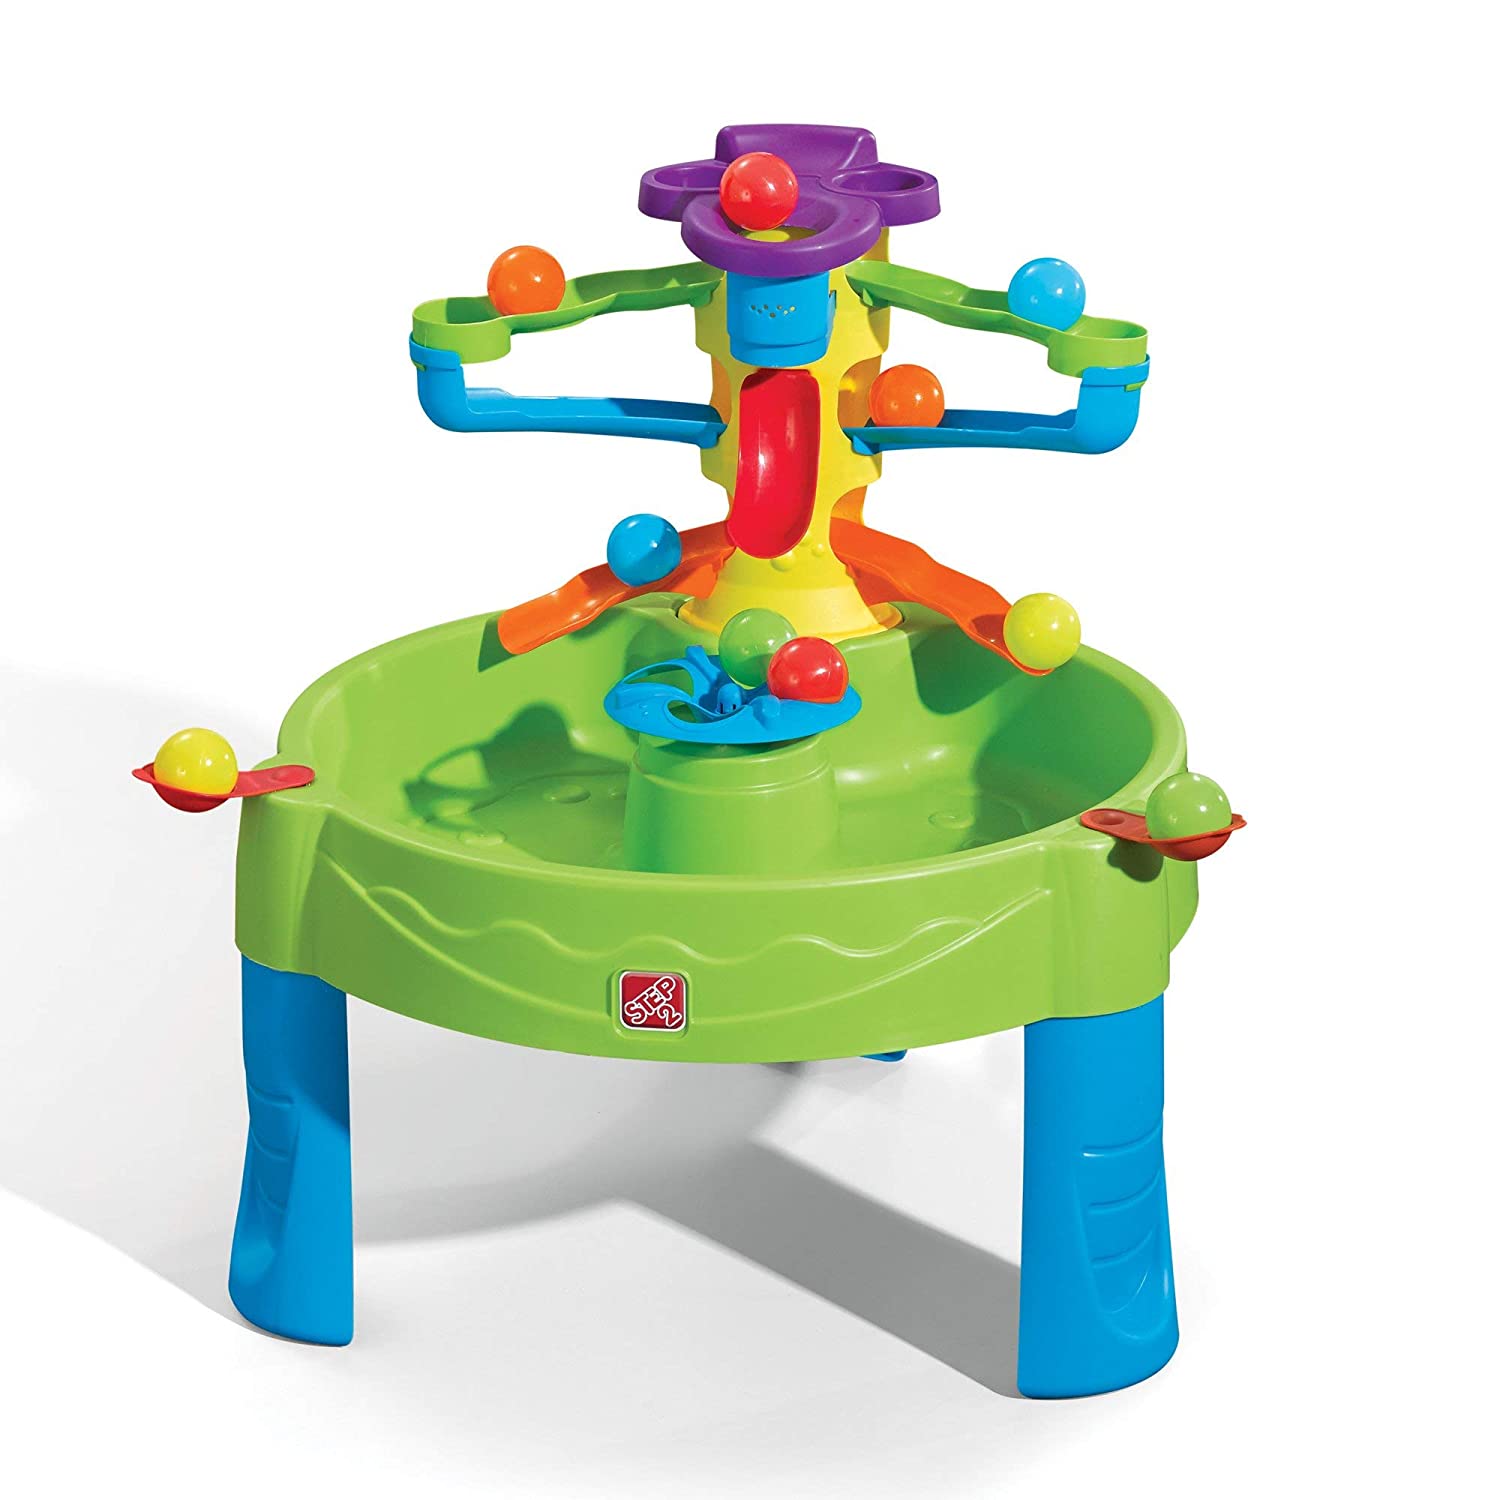 Step2 Busy Ball Play Table - 2 in 1 Walk Around